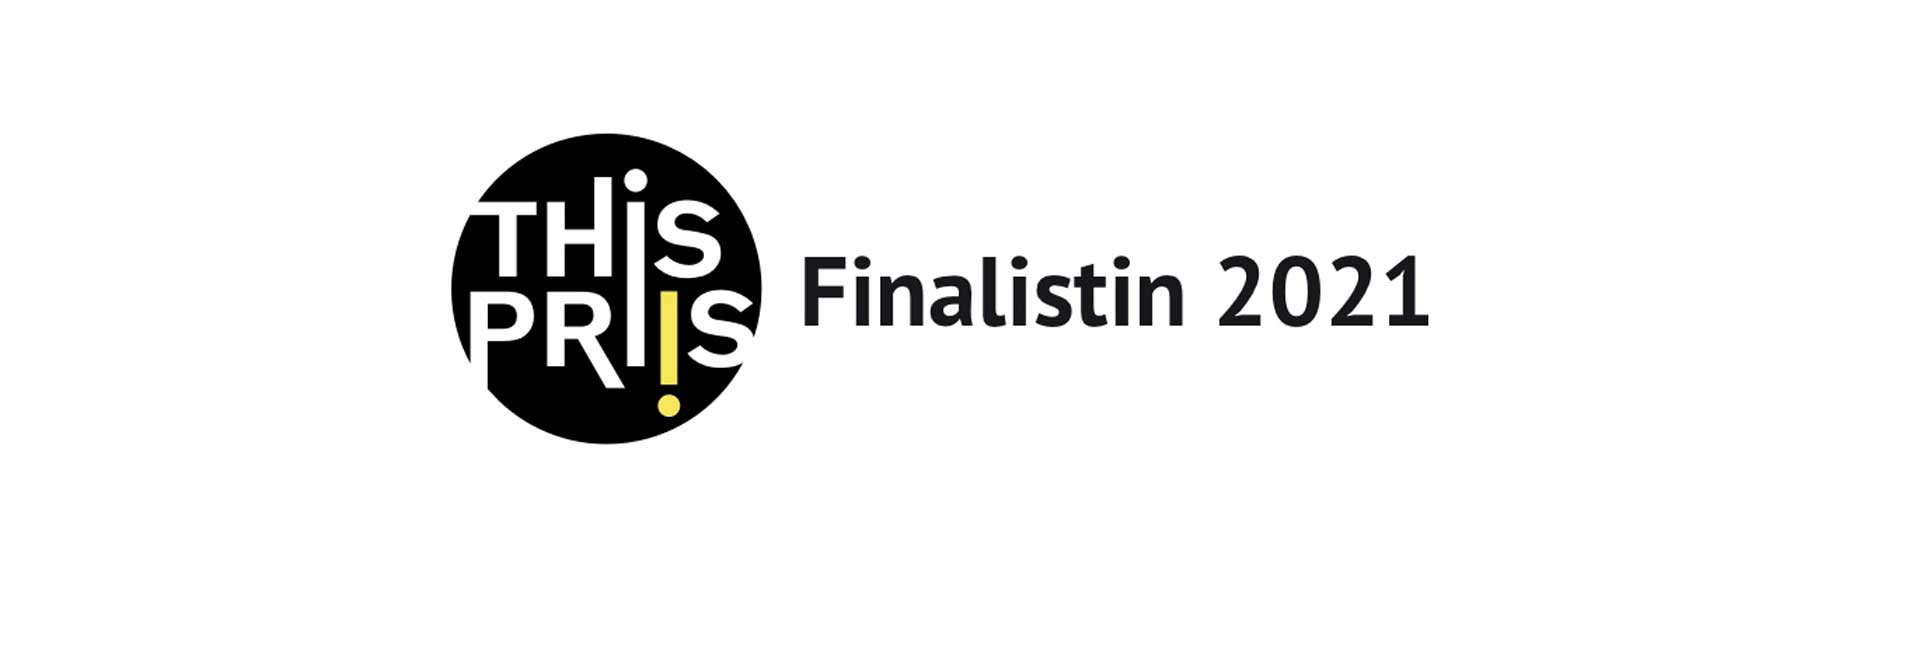 Cargocare is one of the five finalists for this year's This-Priis!